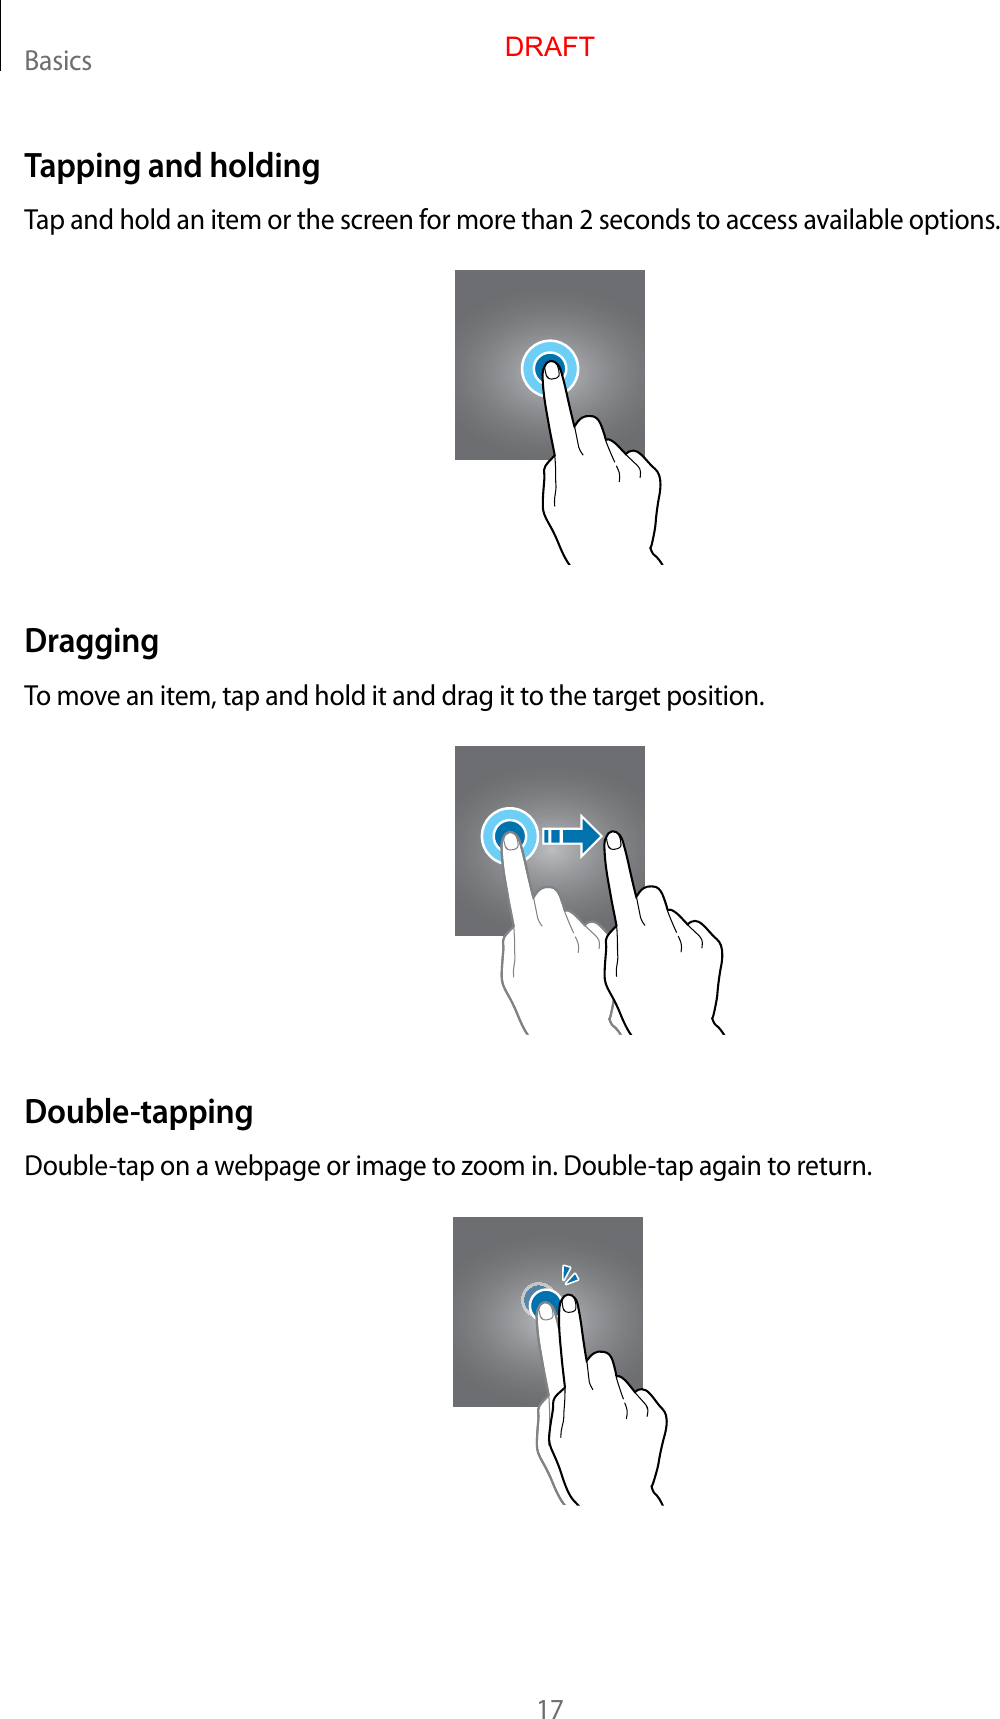 Basics17Tapping and holdingTap and hold an item or the screen for more than 2 seconds to access available options.DraggingTo move an item, tap and hold it and drag it to the target position.Double-tappingDouble-tap on a webpage or image to zoom in. Double-tap again to return.DRAFT